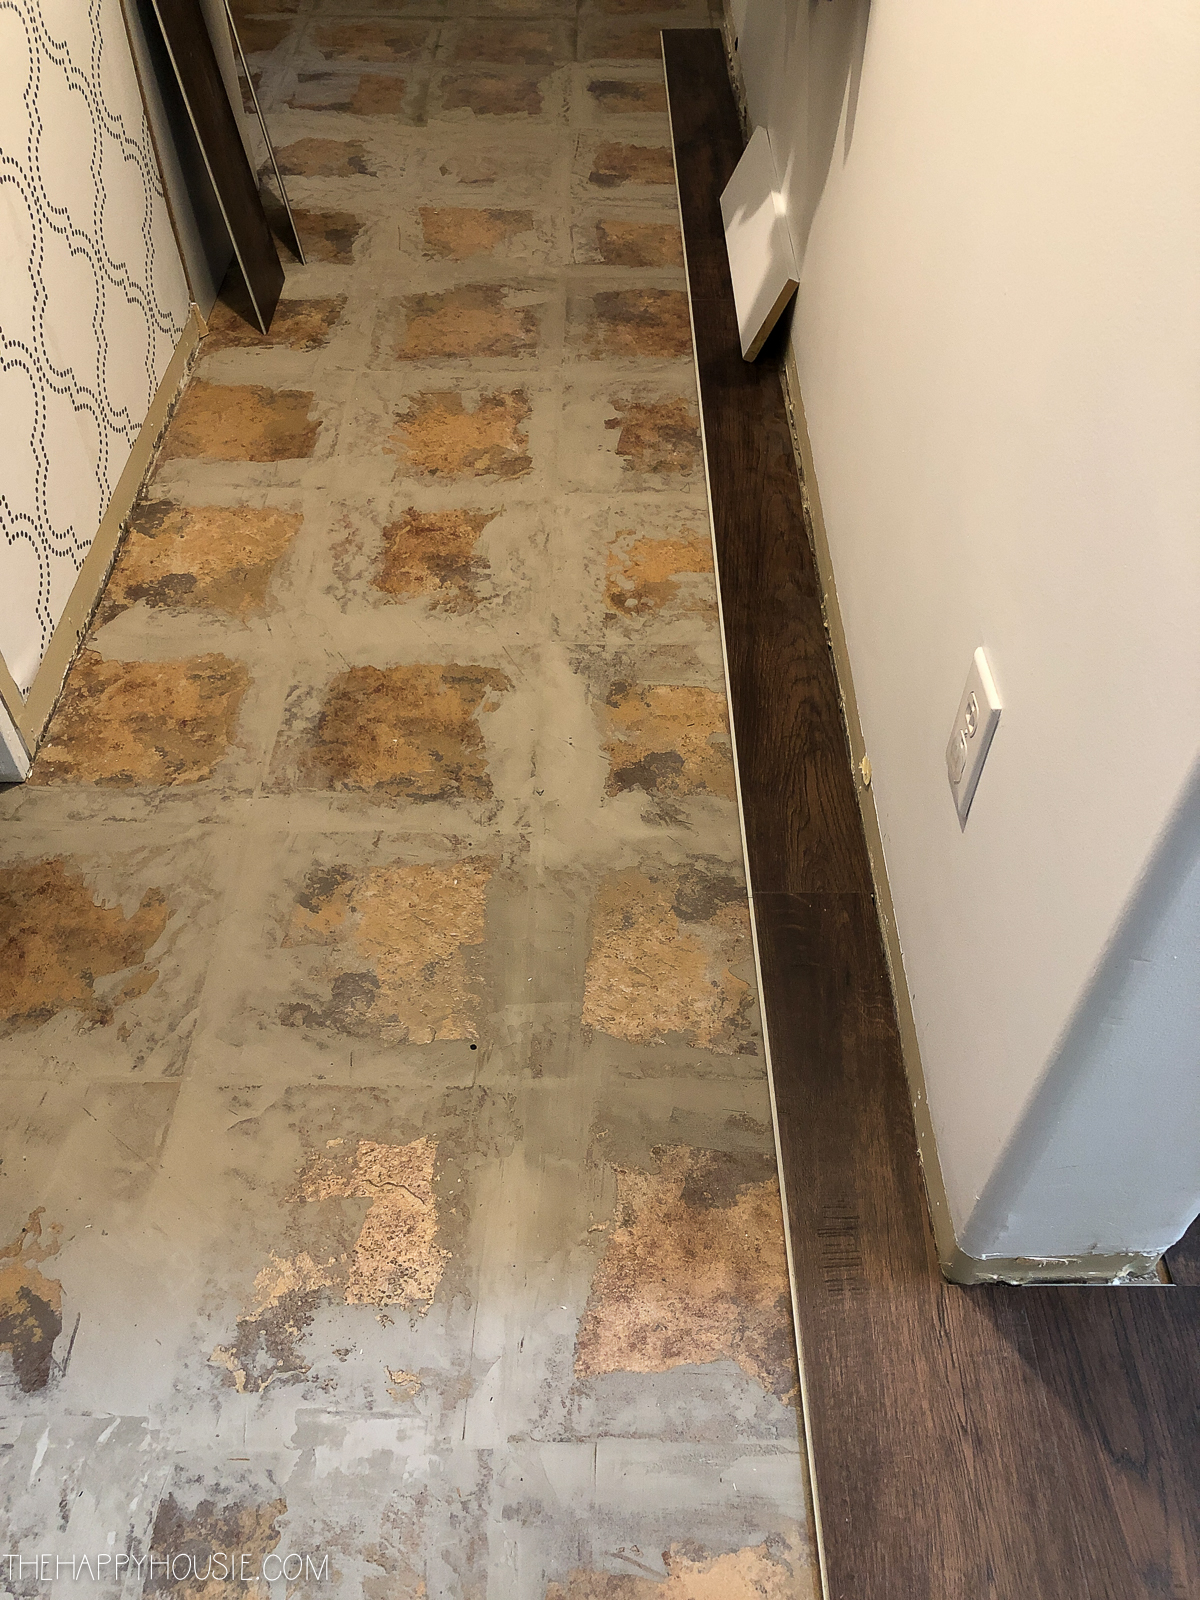 Install Vinyl Plank Over Tile Floors, What Is The Best Flooring To Put Over Tile